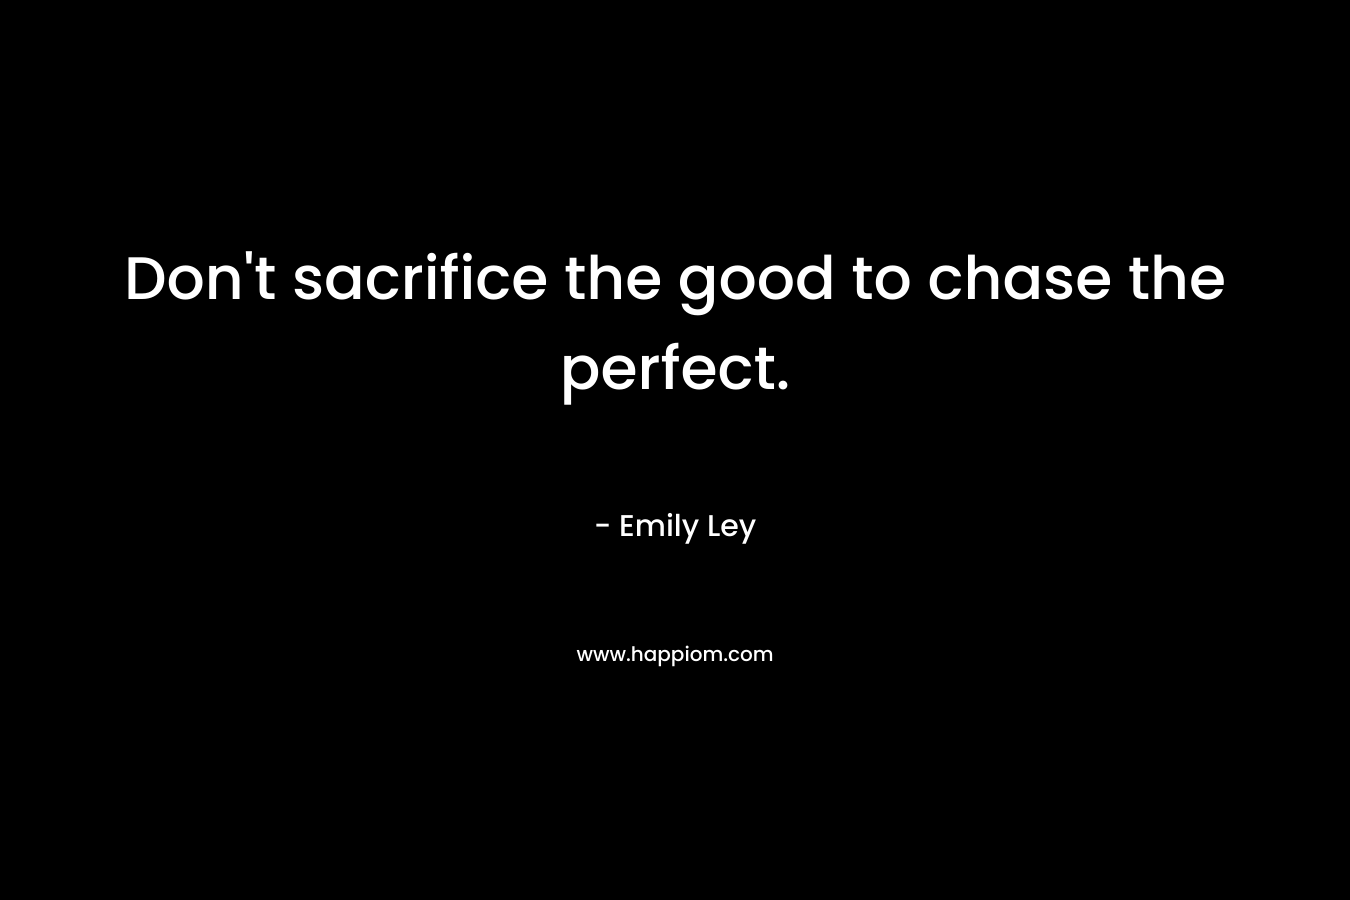 Don't sacrifice the good to chase the perfect.